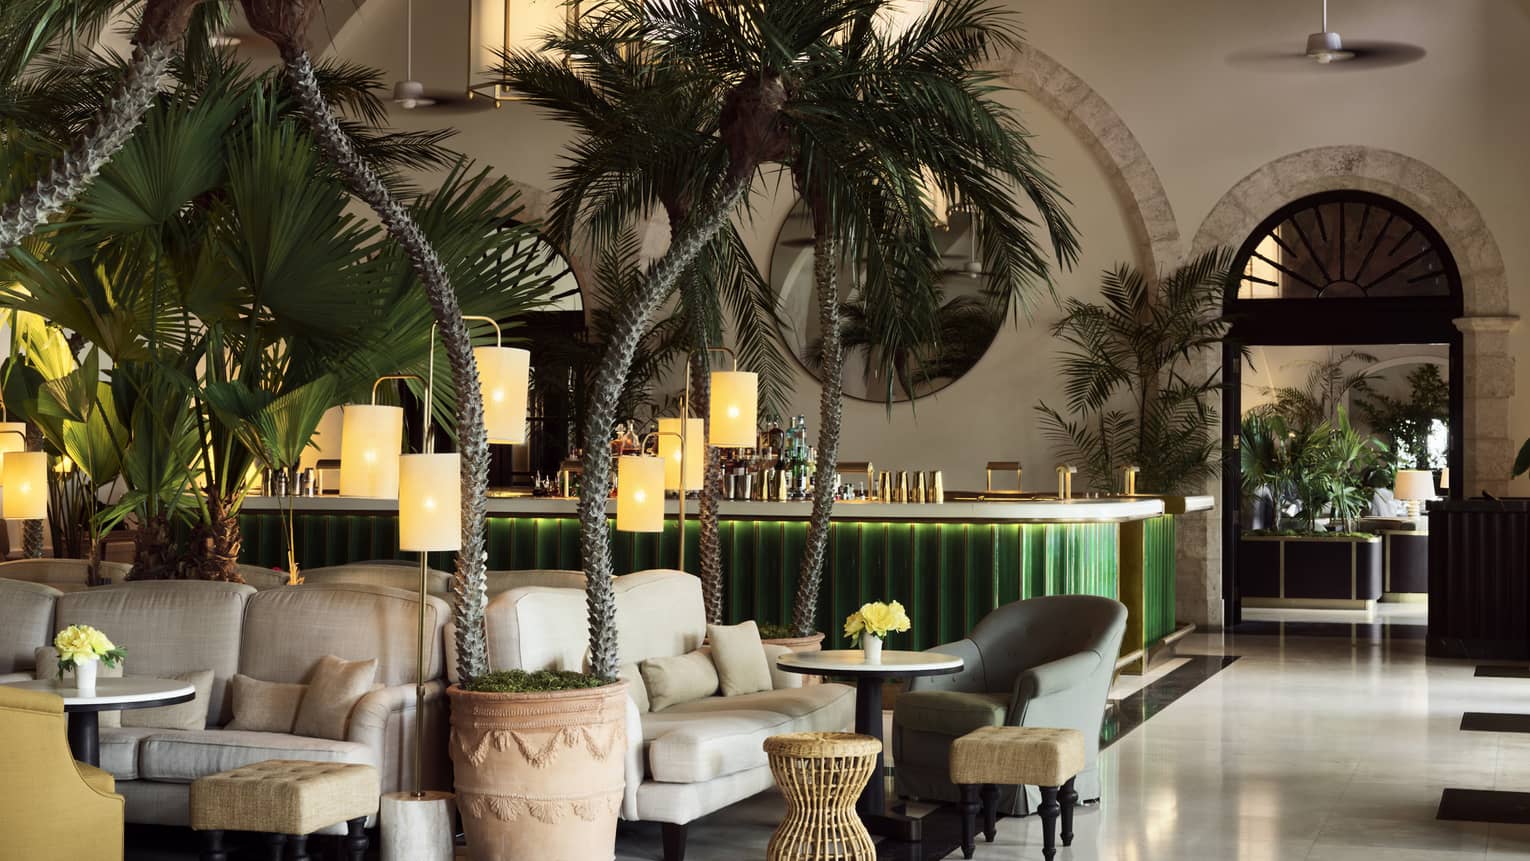 Indoor lounge at the Champagne Bar, with palm trees, white upholstered arm chairs and a green bar in the background. One of the many Surfside restaurants of note at Four Seasons Surf Club, Florida.